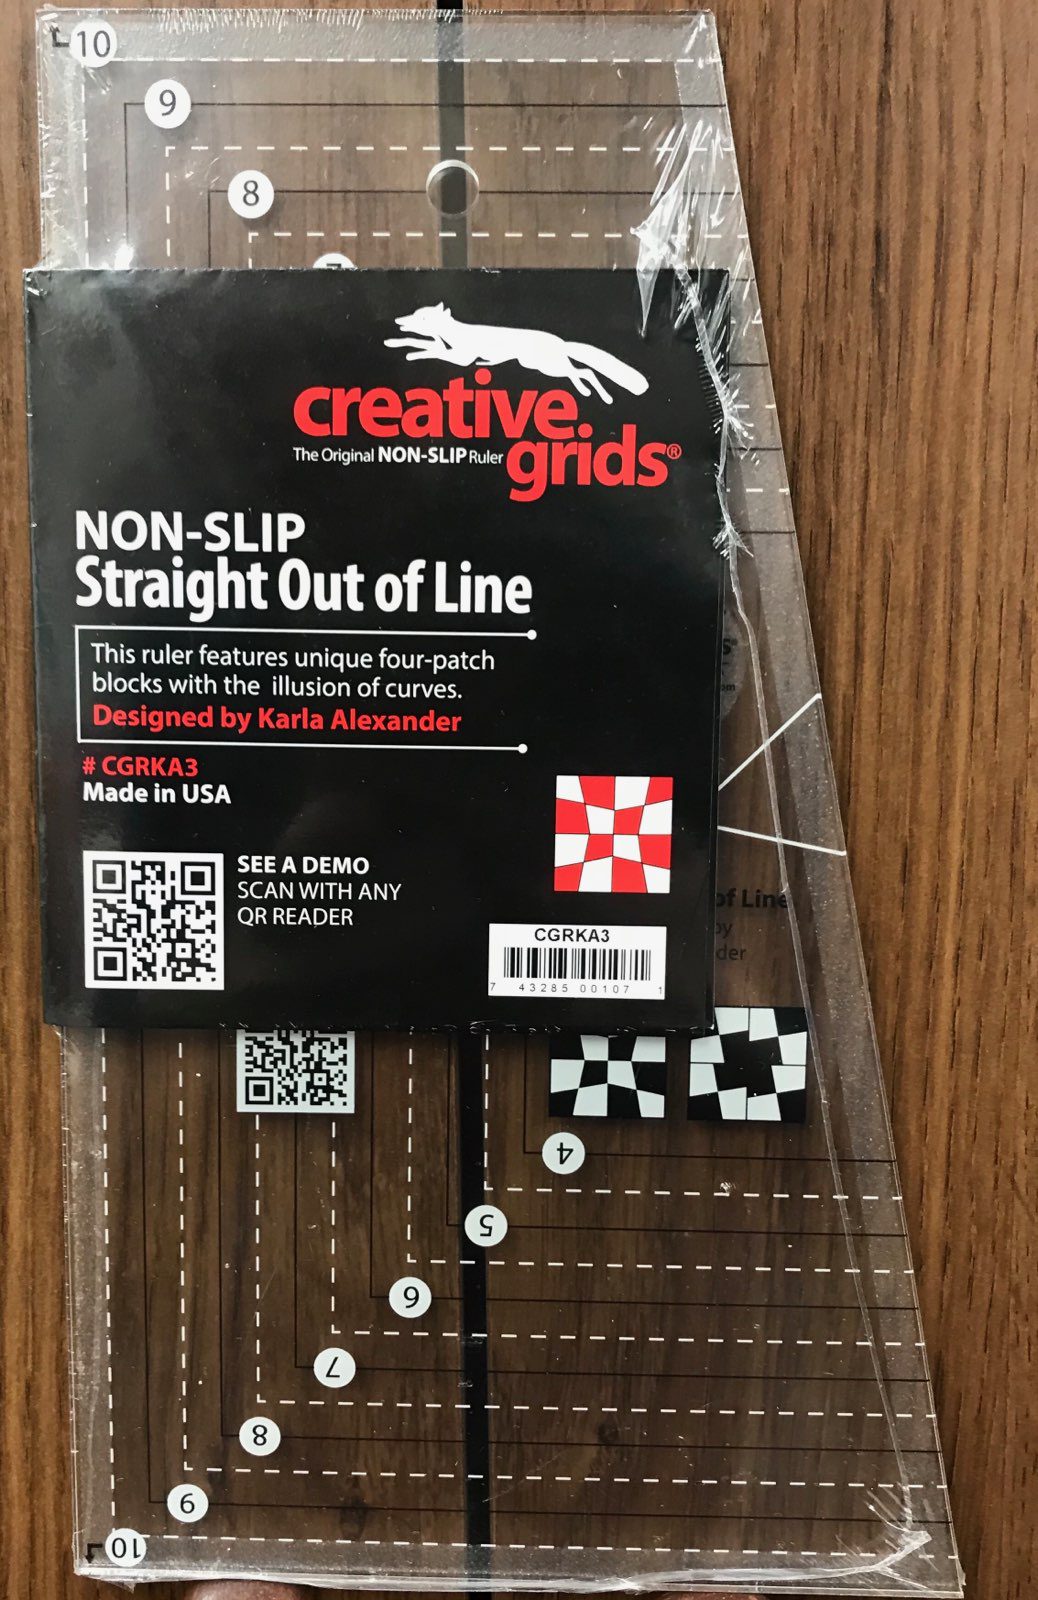 Creative Grids Ruler - Non- Slip Straight Out of Line